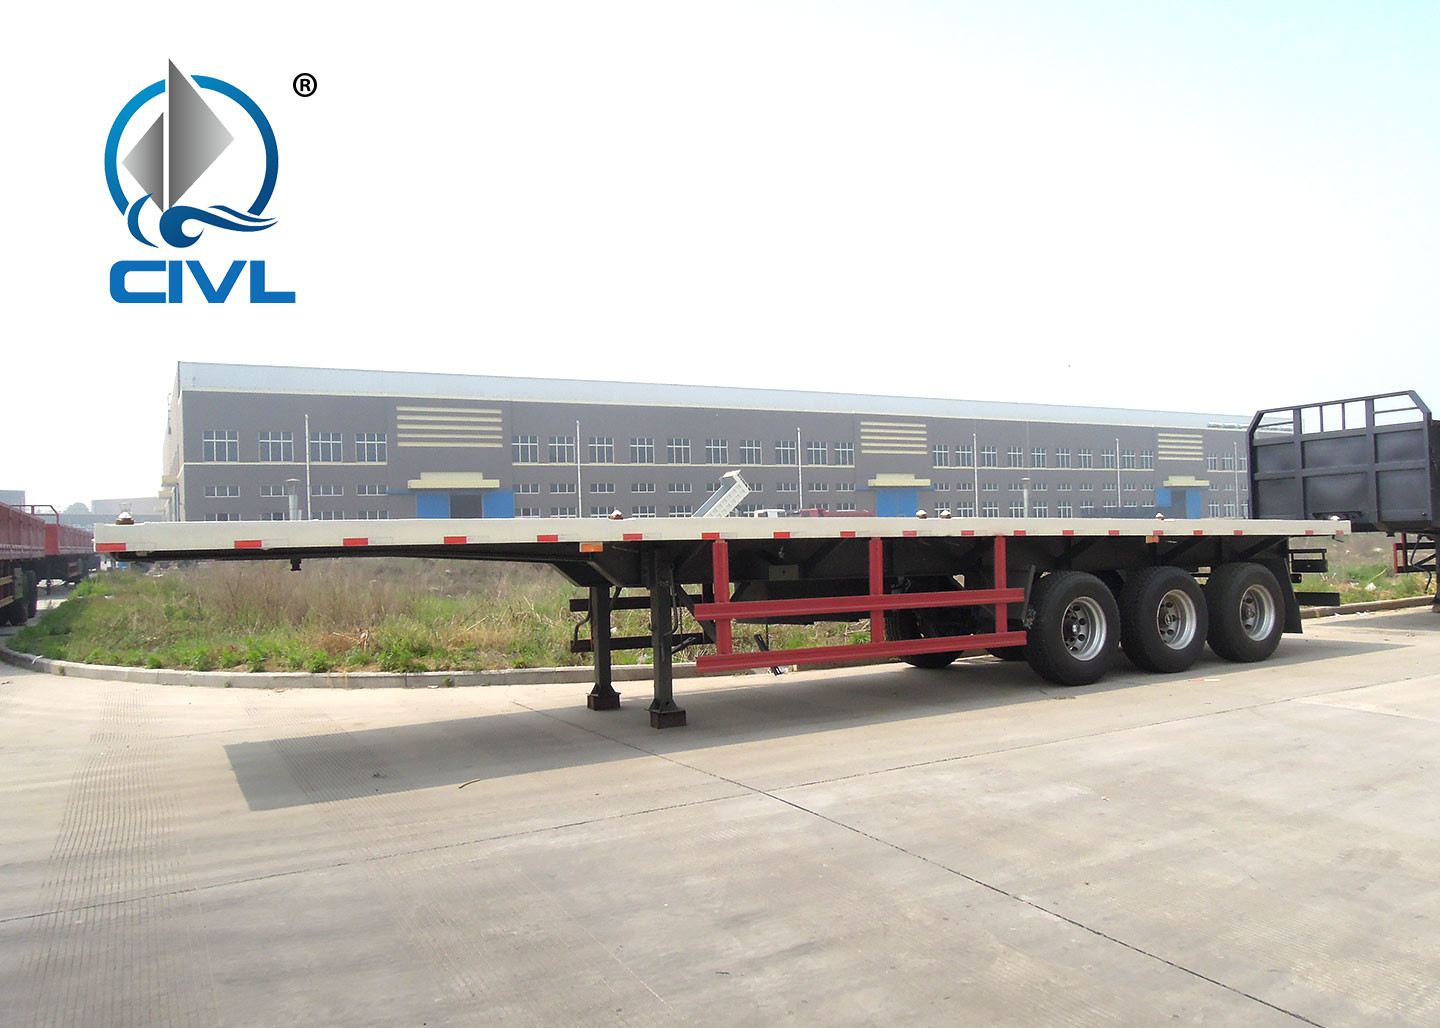 40 Feet Container Carrying Semi Trailer Trucks / Flatbed Container Semi Trailer 3 Axles